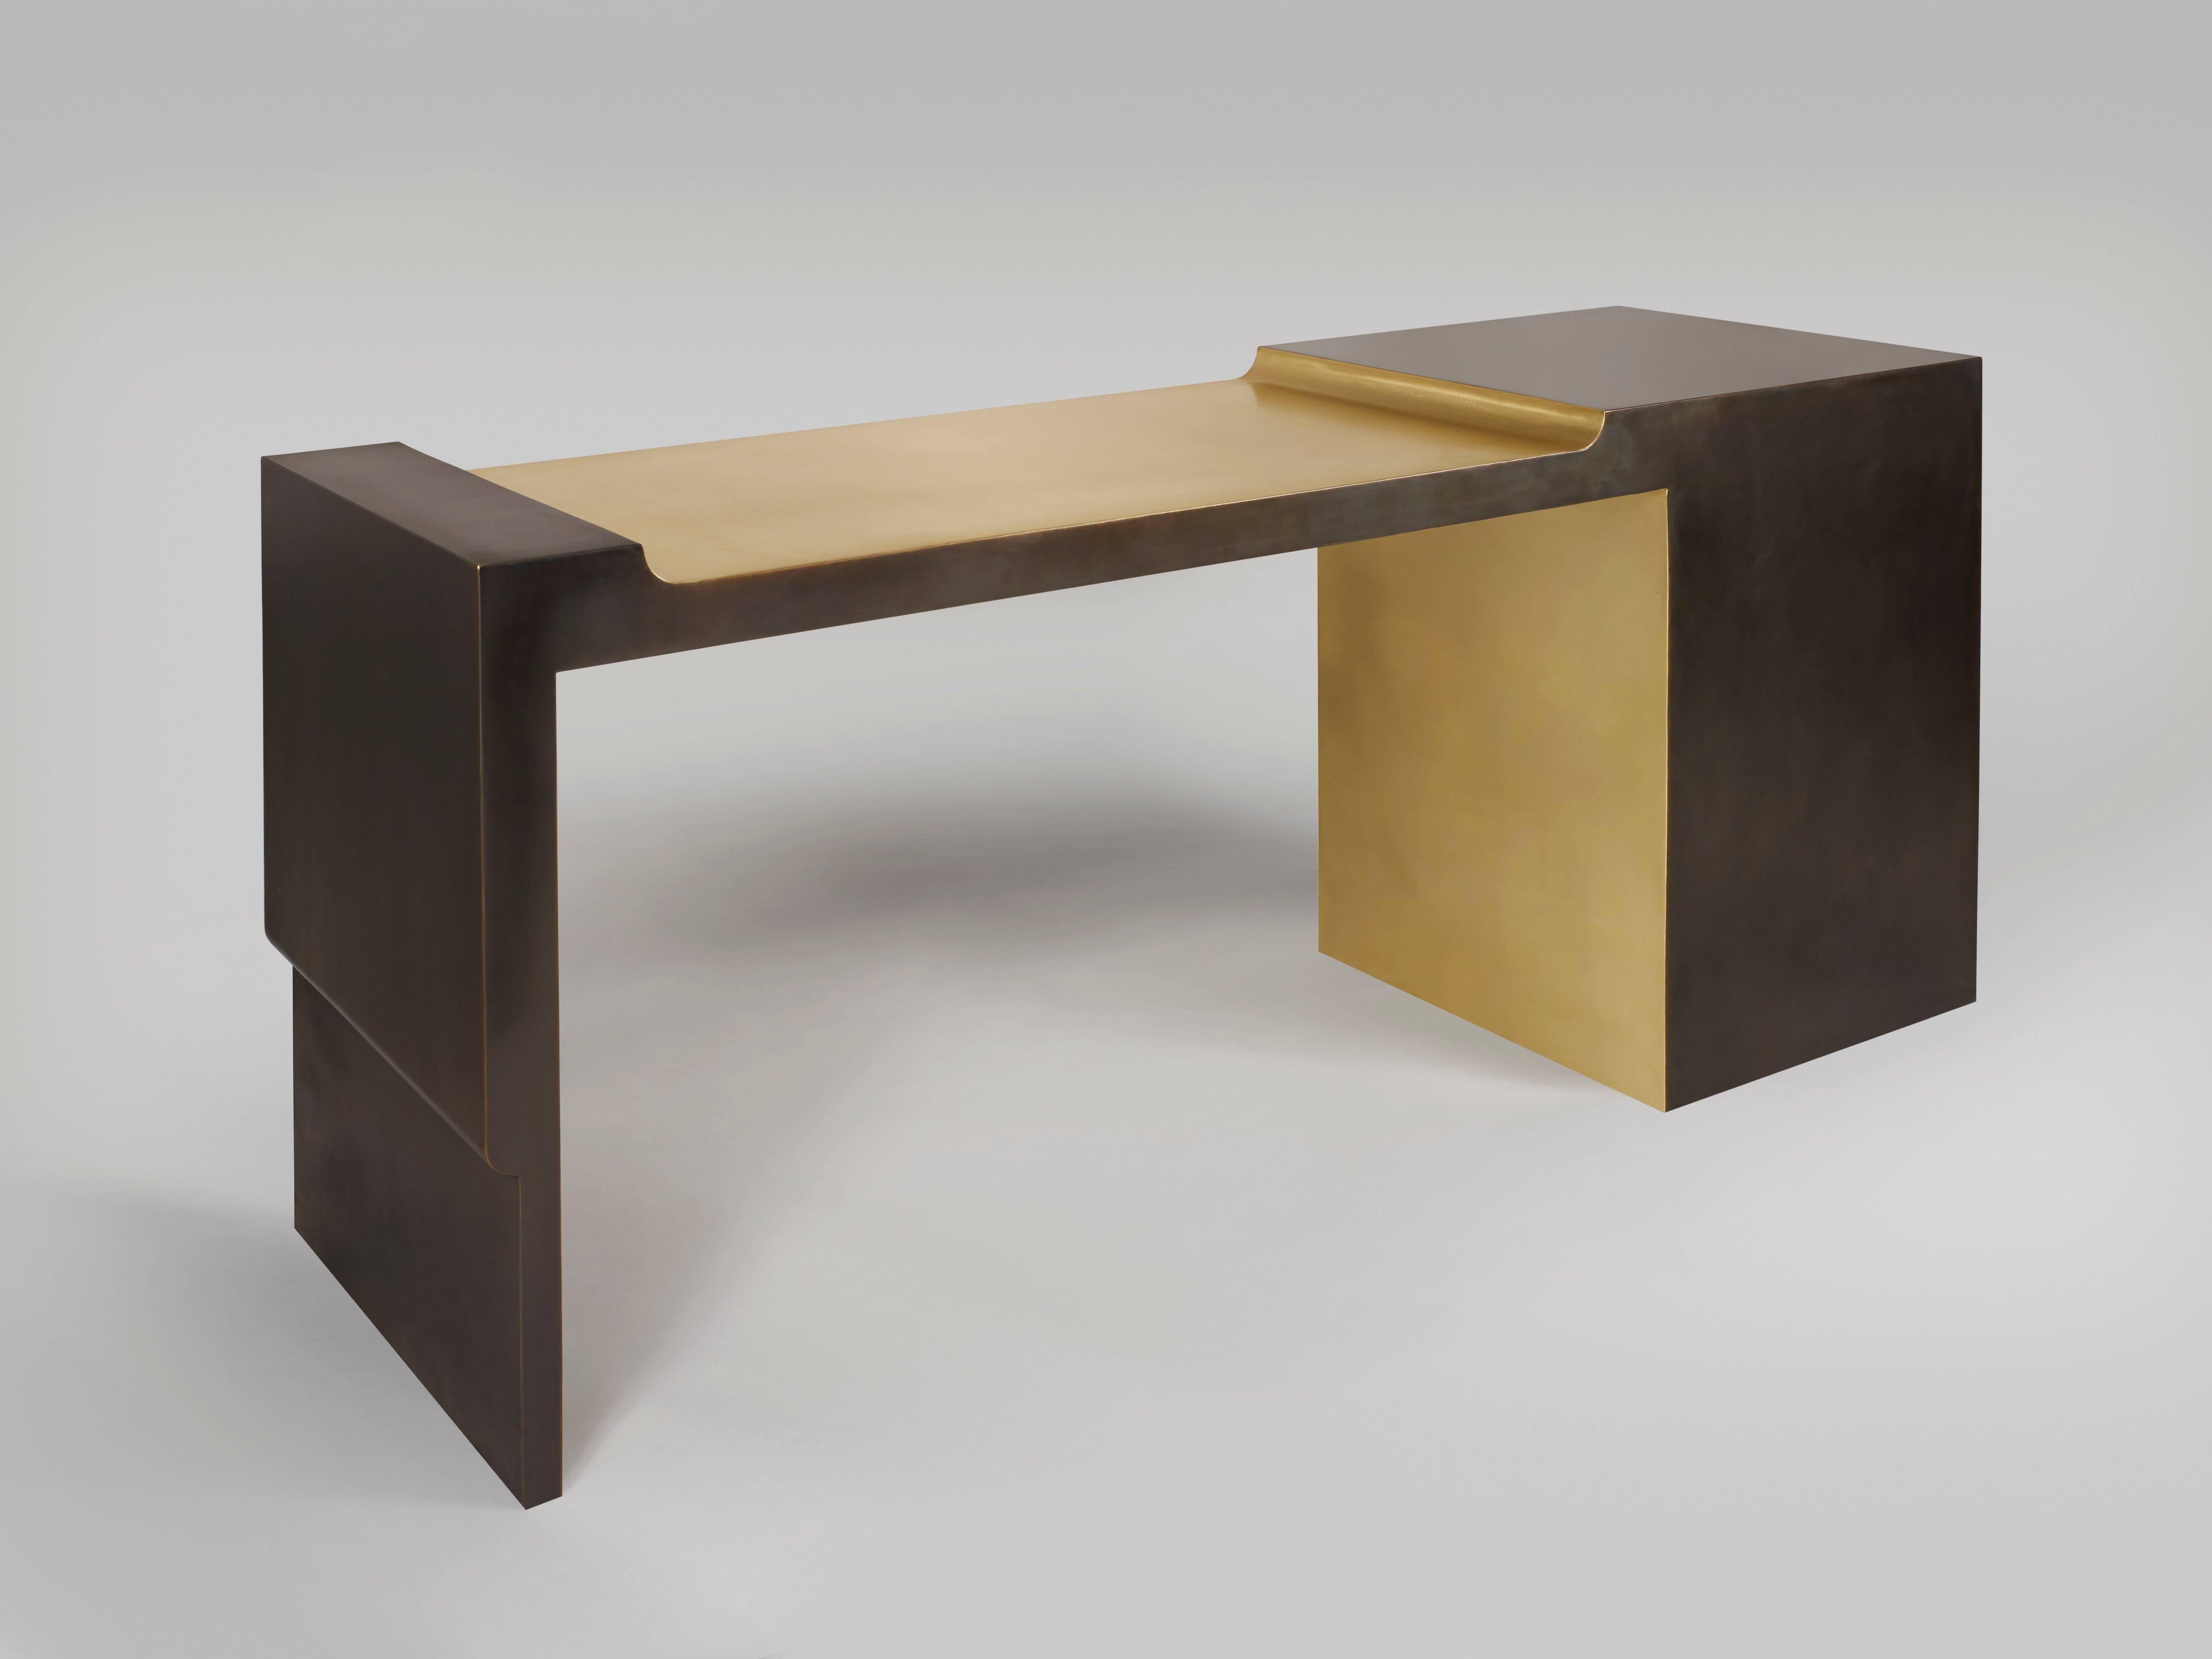 ‘XiangSheng II Console - Desk‘ is an elegant collectible design work that combines surfaces in brushed bronze with a very nice champagne color and surfaces in oxidized bronze with an intense brown patina. It is part of the ‘XiangSheng’ furniture